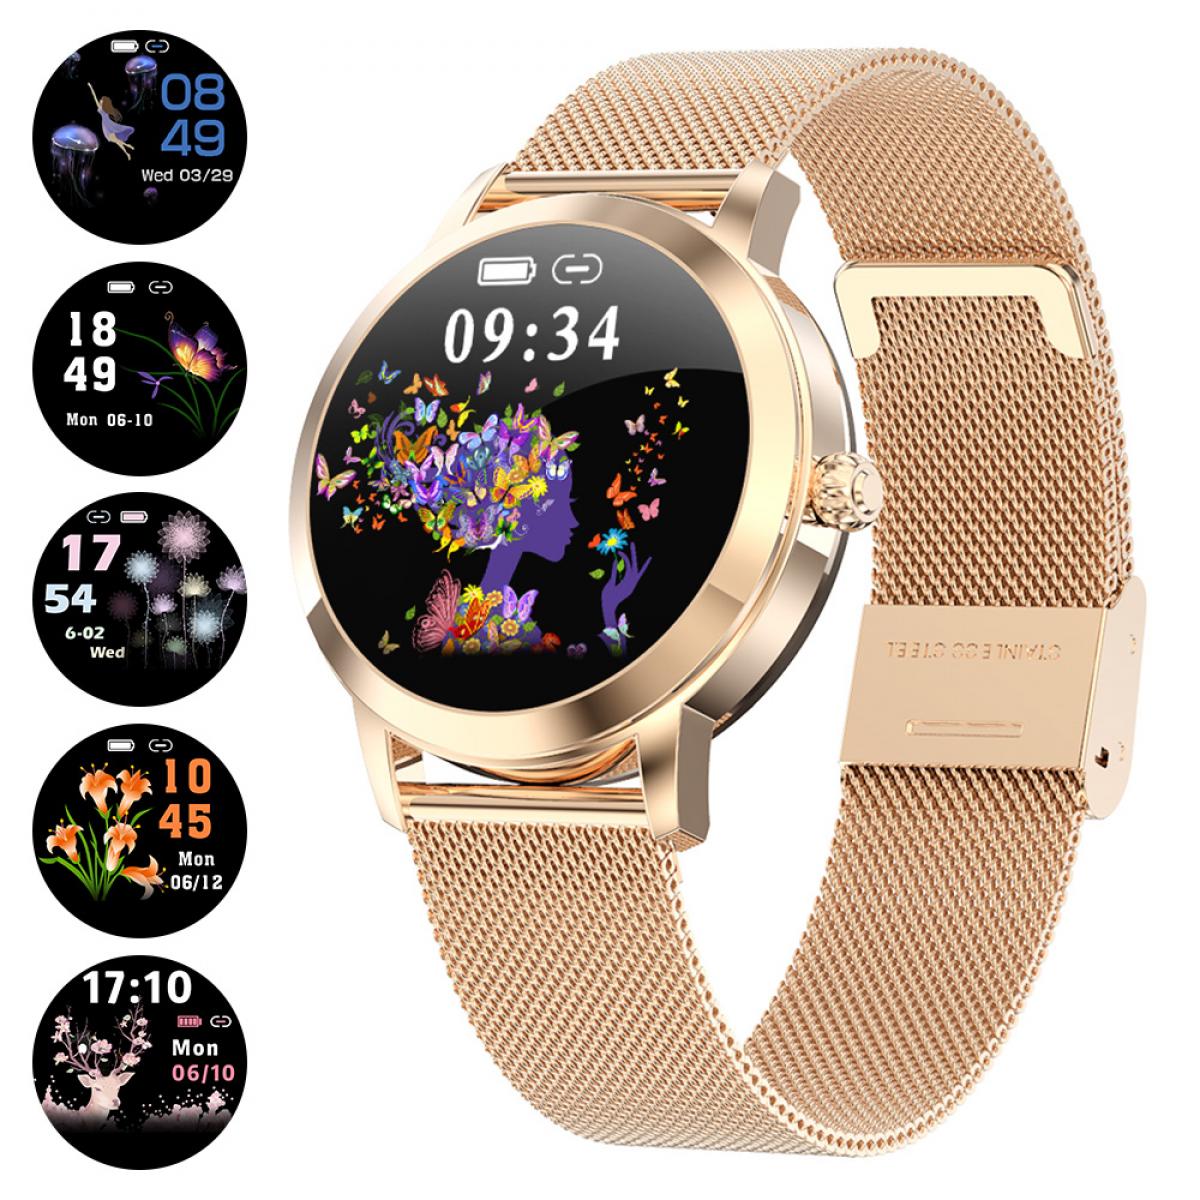 Waterproof Fitness Smart Watches Gold Women Lady Heart Rate Tracker iOS Android. 